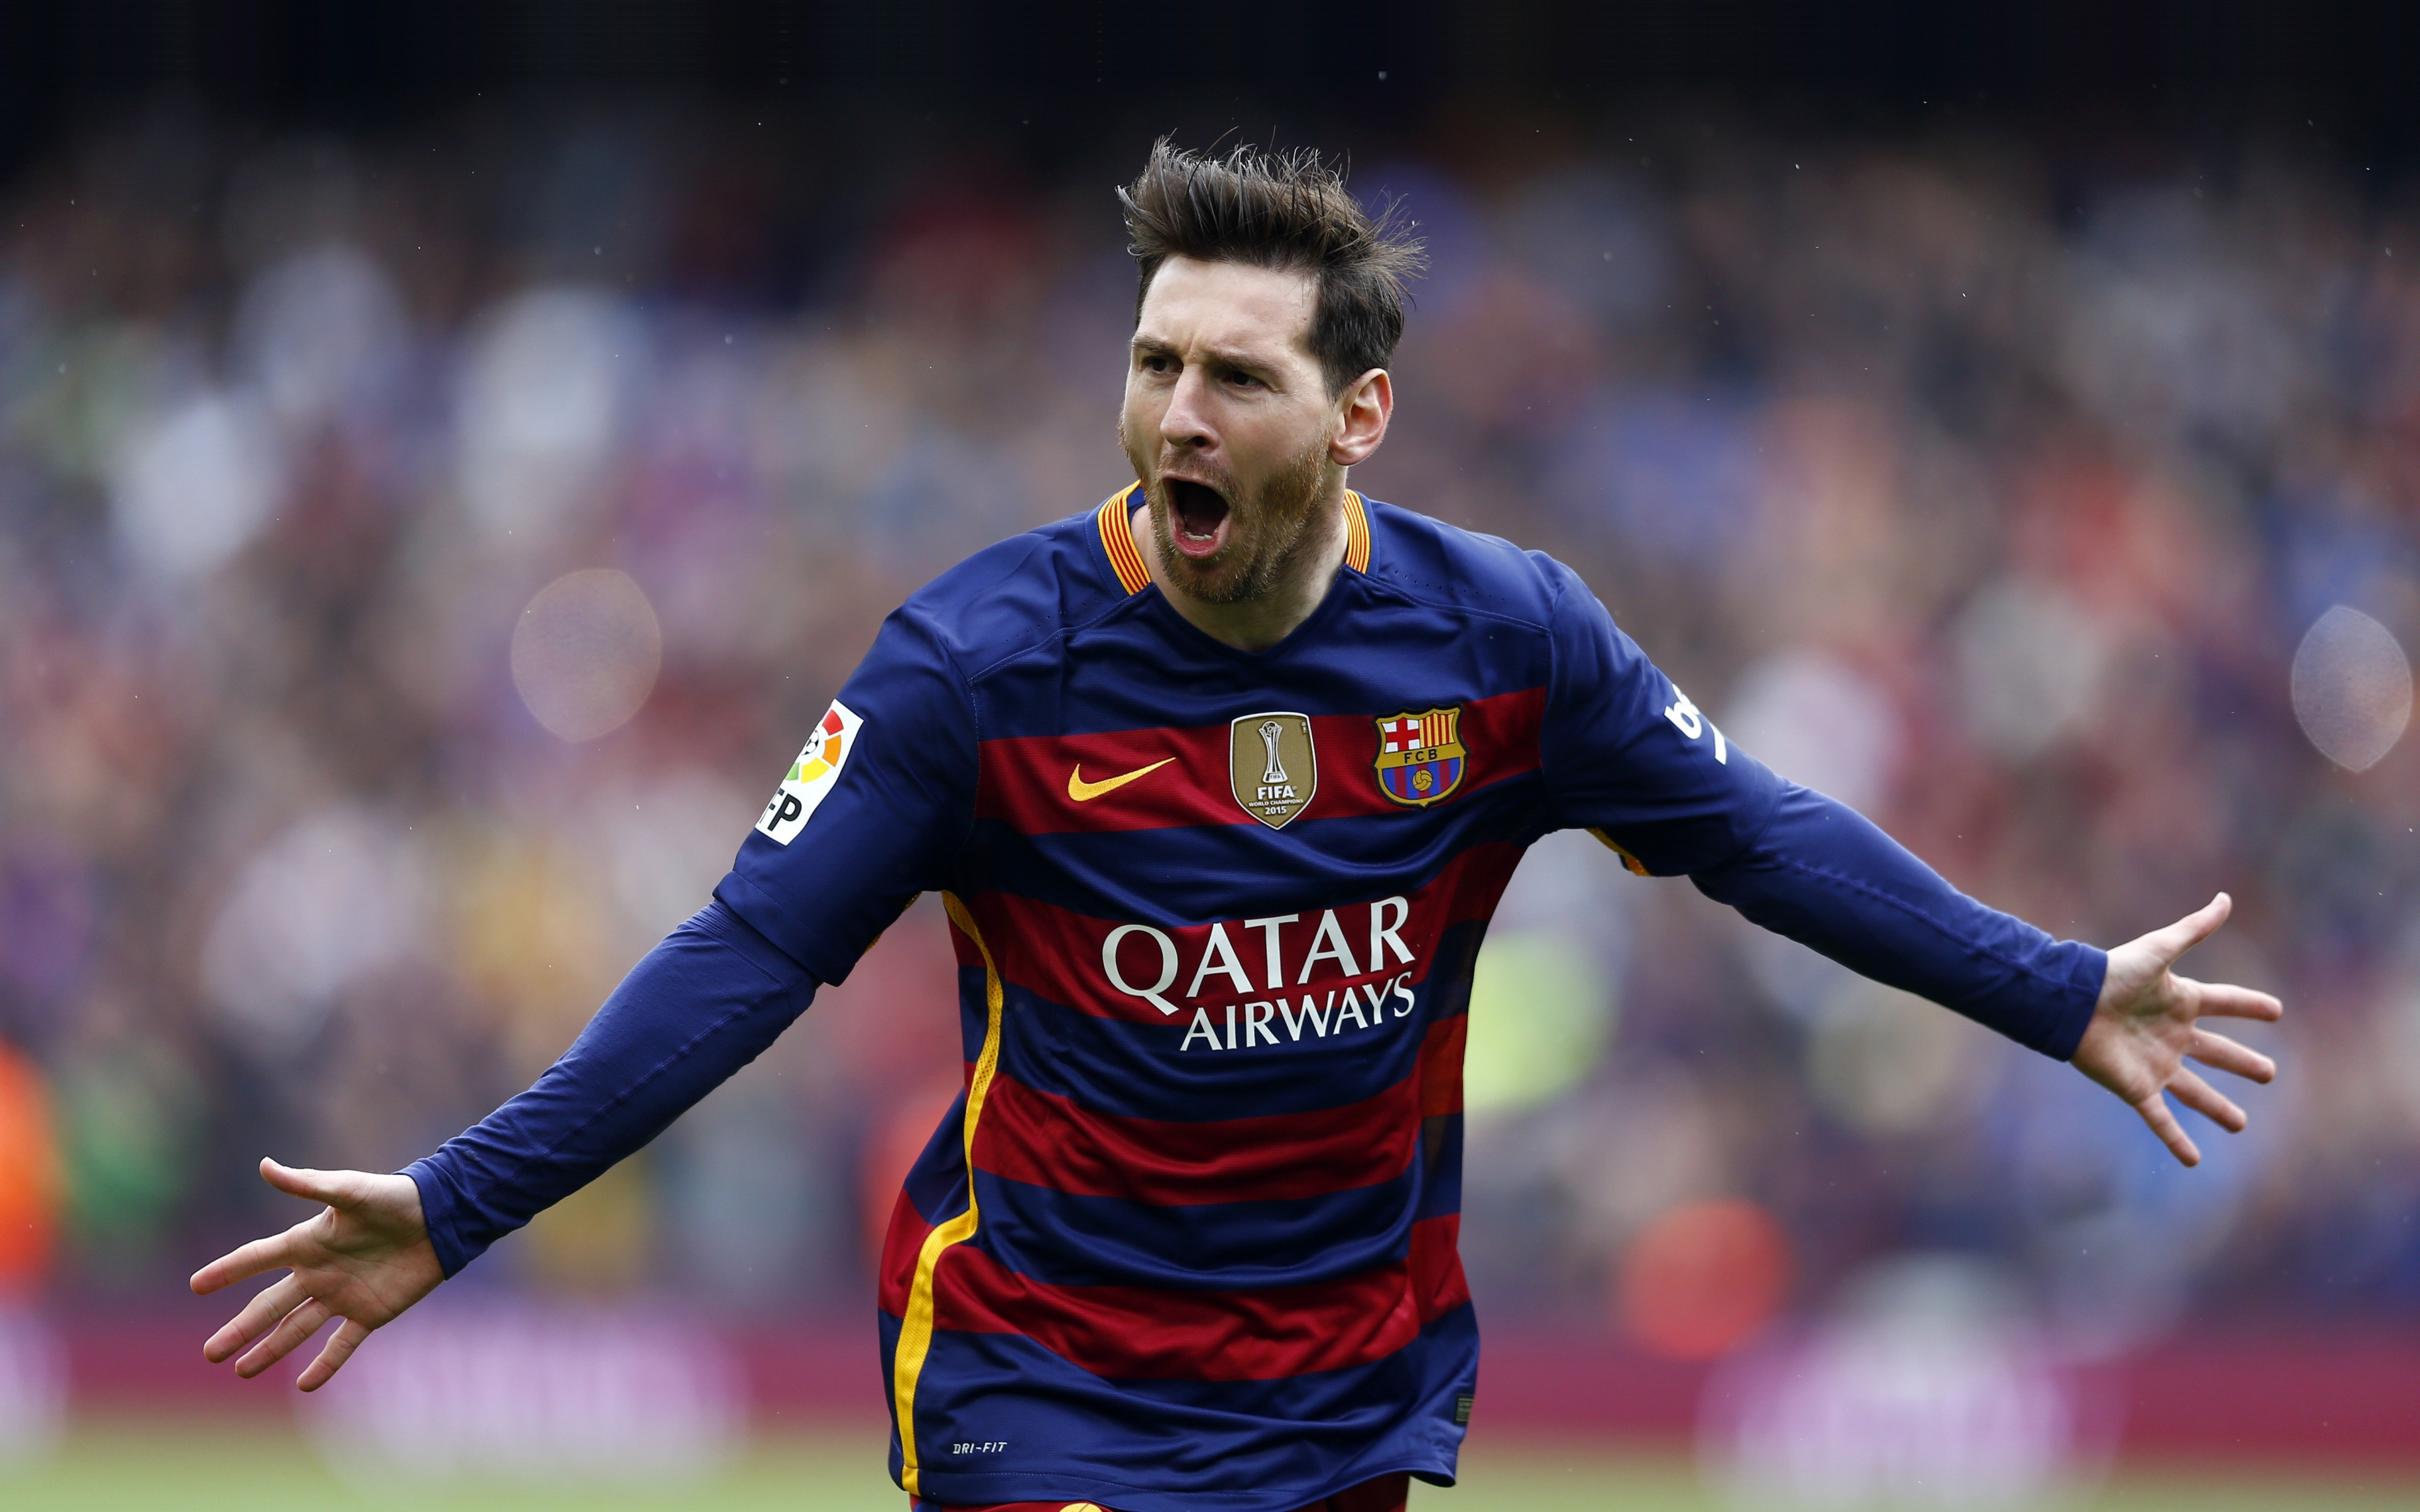 Download 3840x2400 wallpaper lionel messi, goal, celebrity, football player, 4k, ultra HD 16: widescreen, 3840x2400 HD image, background, 9589